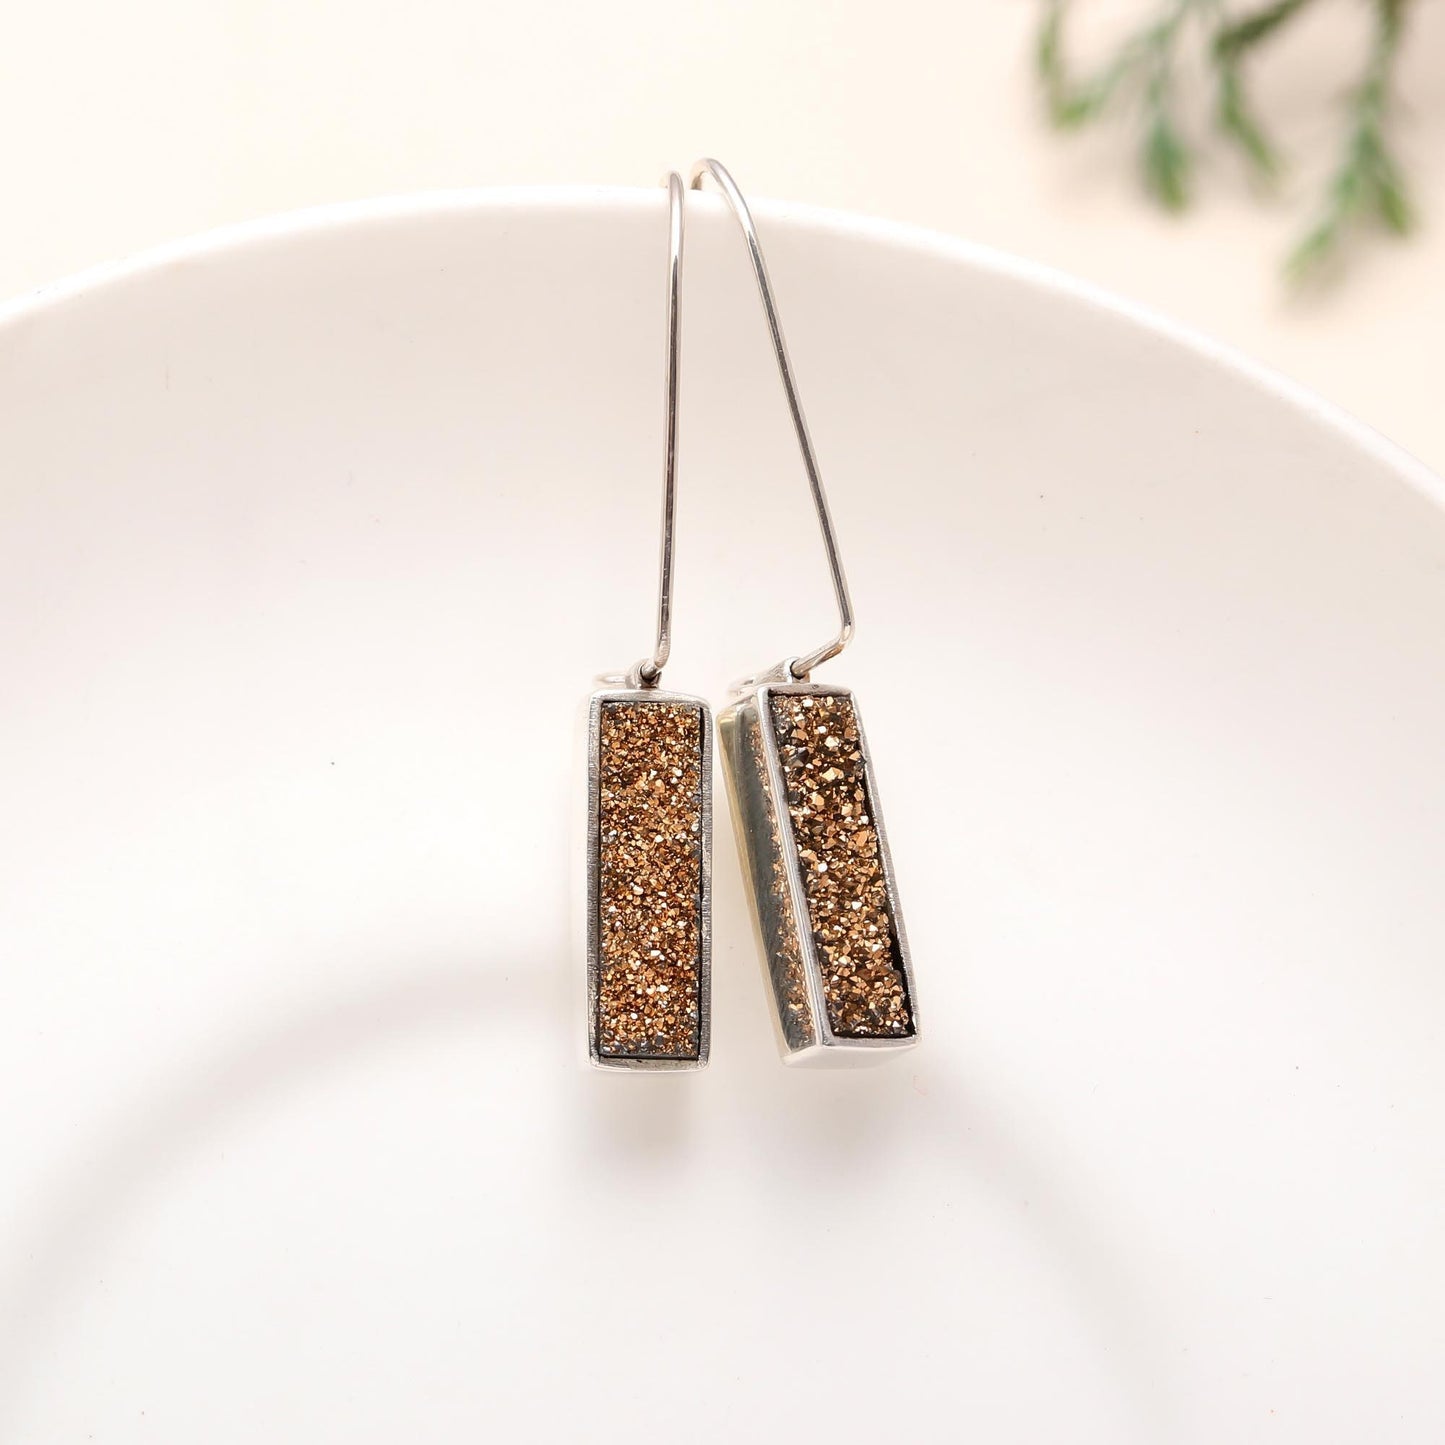 Solid 925 Sterling Silver Titanium Gold Drusy  Earring in Rectangle Shape Drusy, Birthday, Anniversary, Women, Girls, Simple / Gift for Her